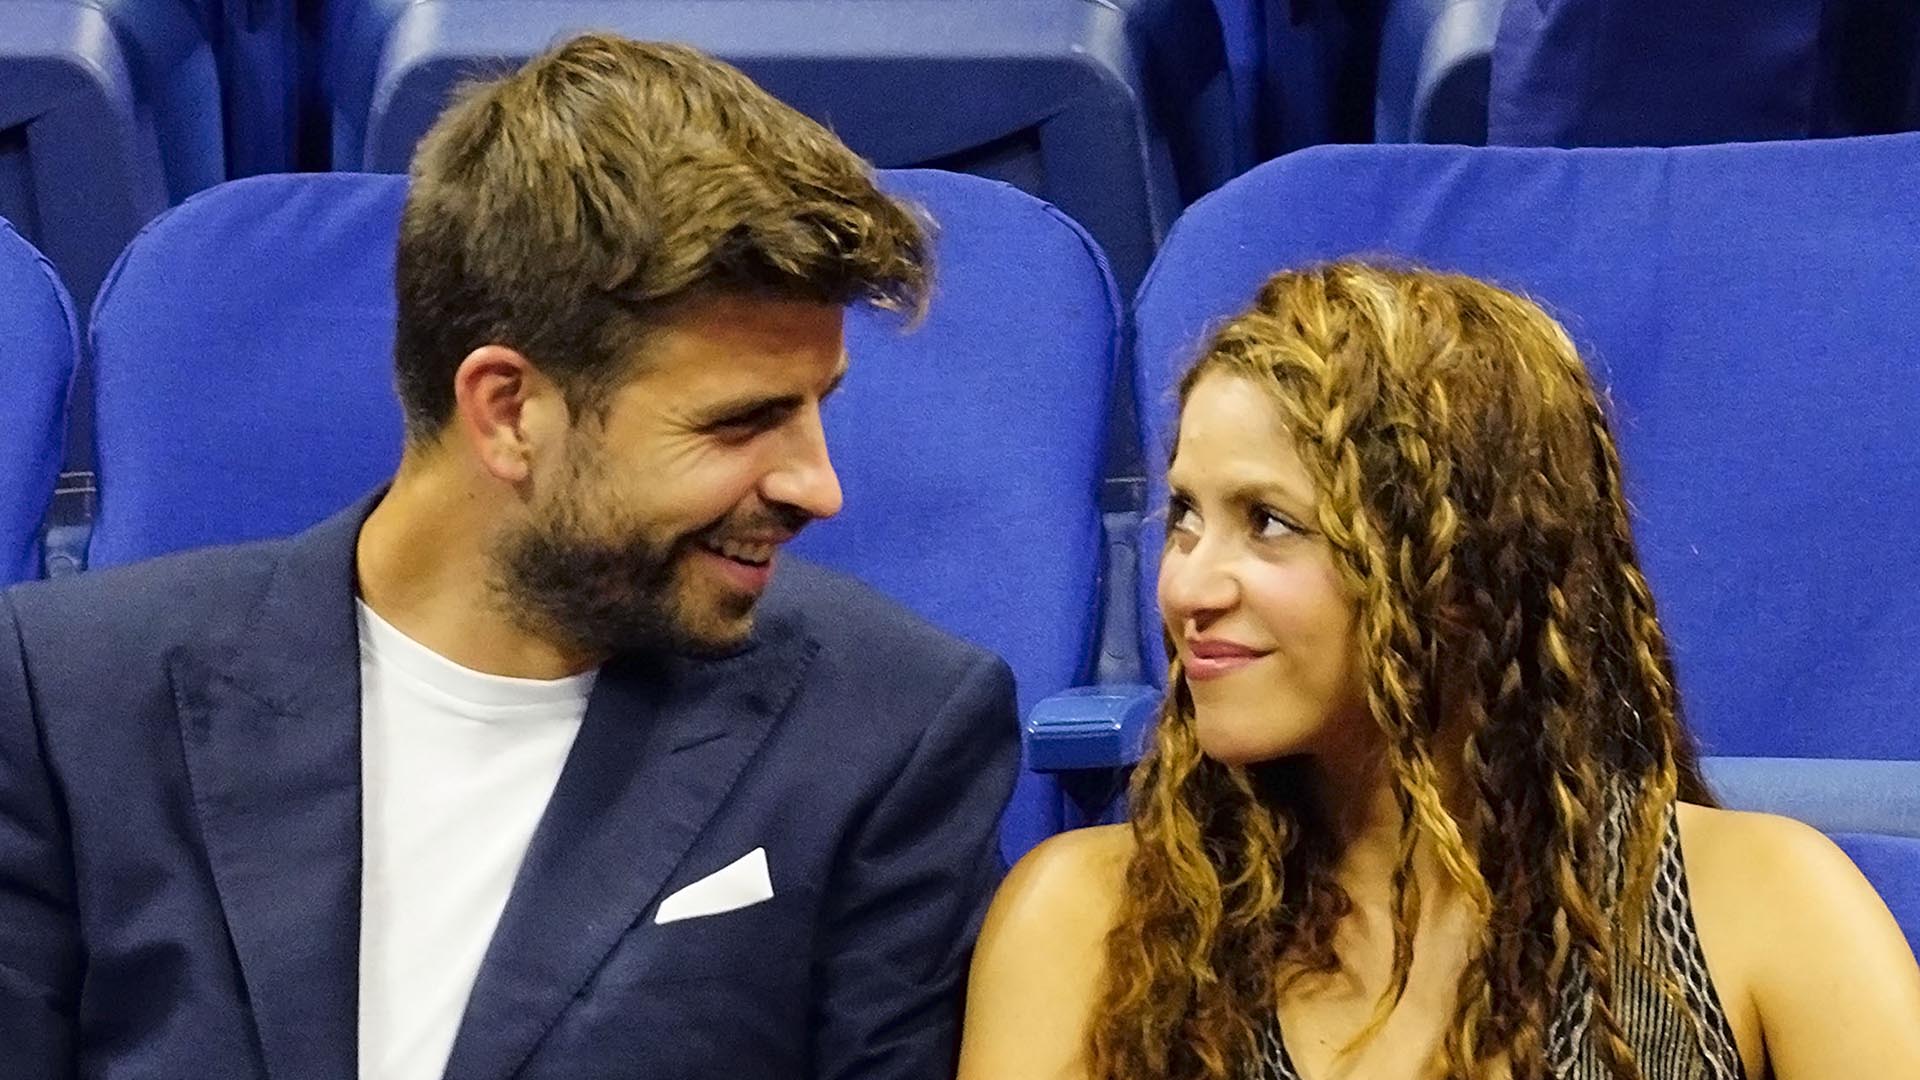 Gerard Pique and Shakira at the 2019 US Open in Flushing, NY.